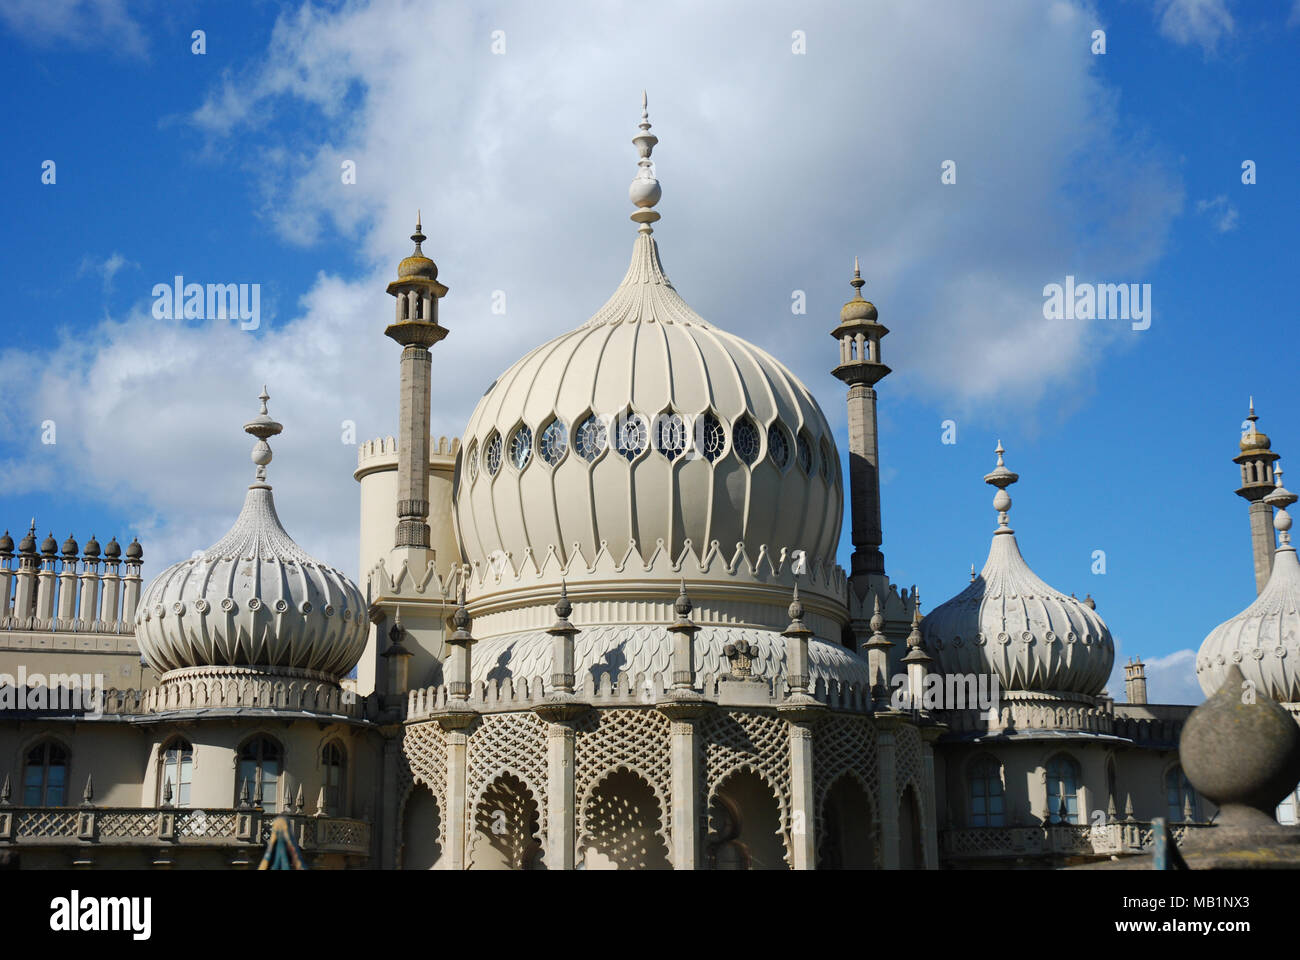 Brighton Pavilion closer view of the domes, minarets and towers Stock Photo